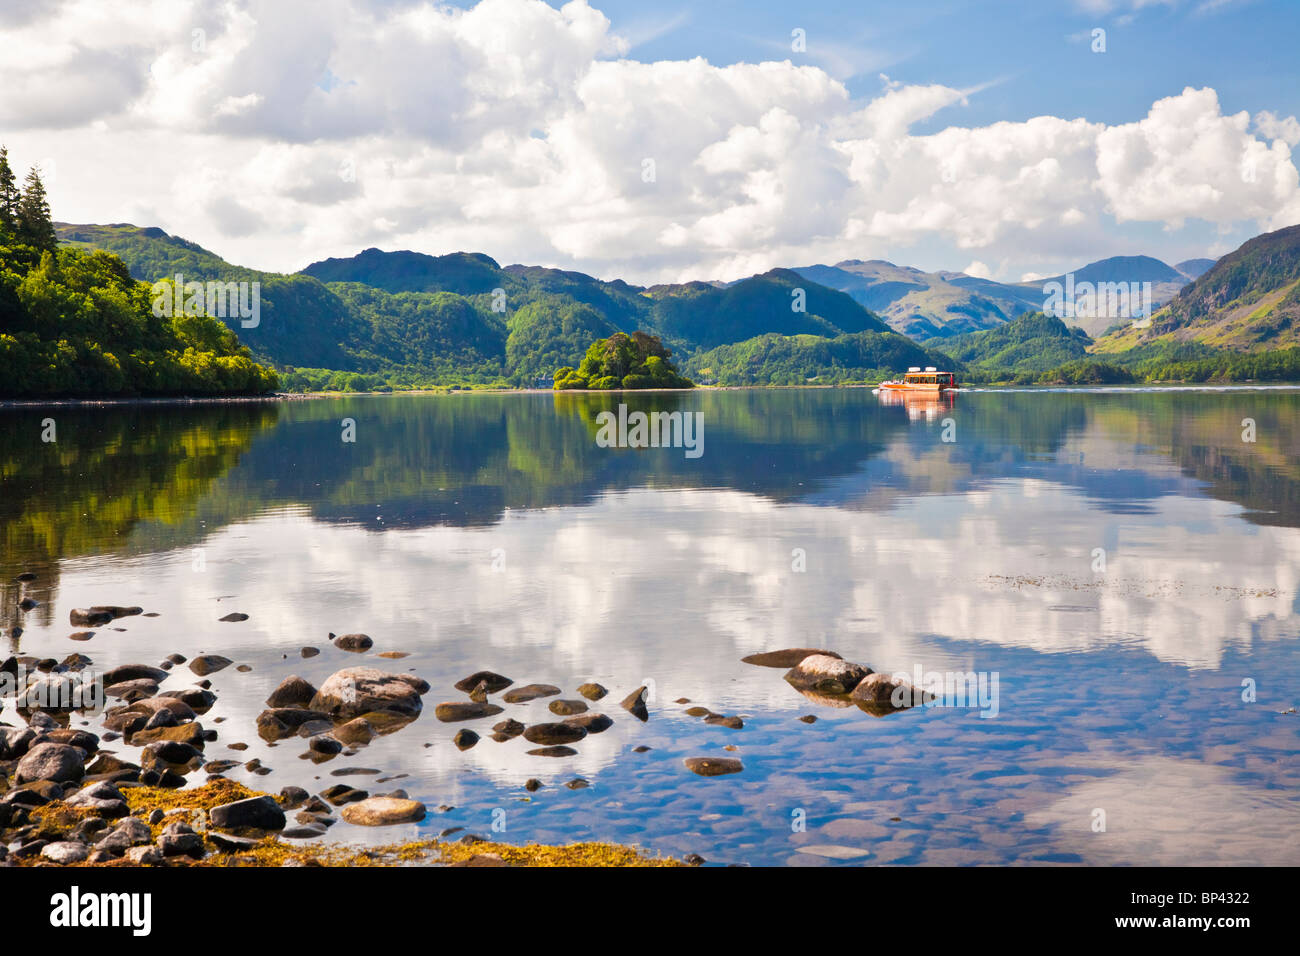 Pleasure launch or boat on Derwent Water, Castle Crag in the distance in the Lake District National Park, Cumbria, England, UK Stock Photo